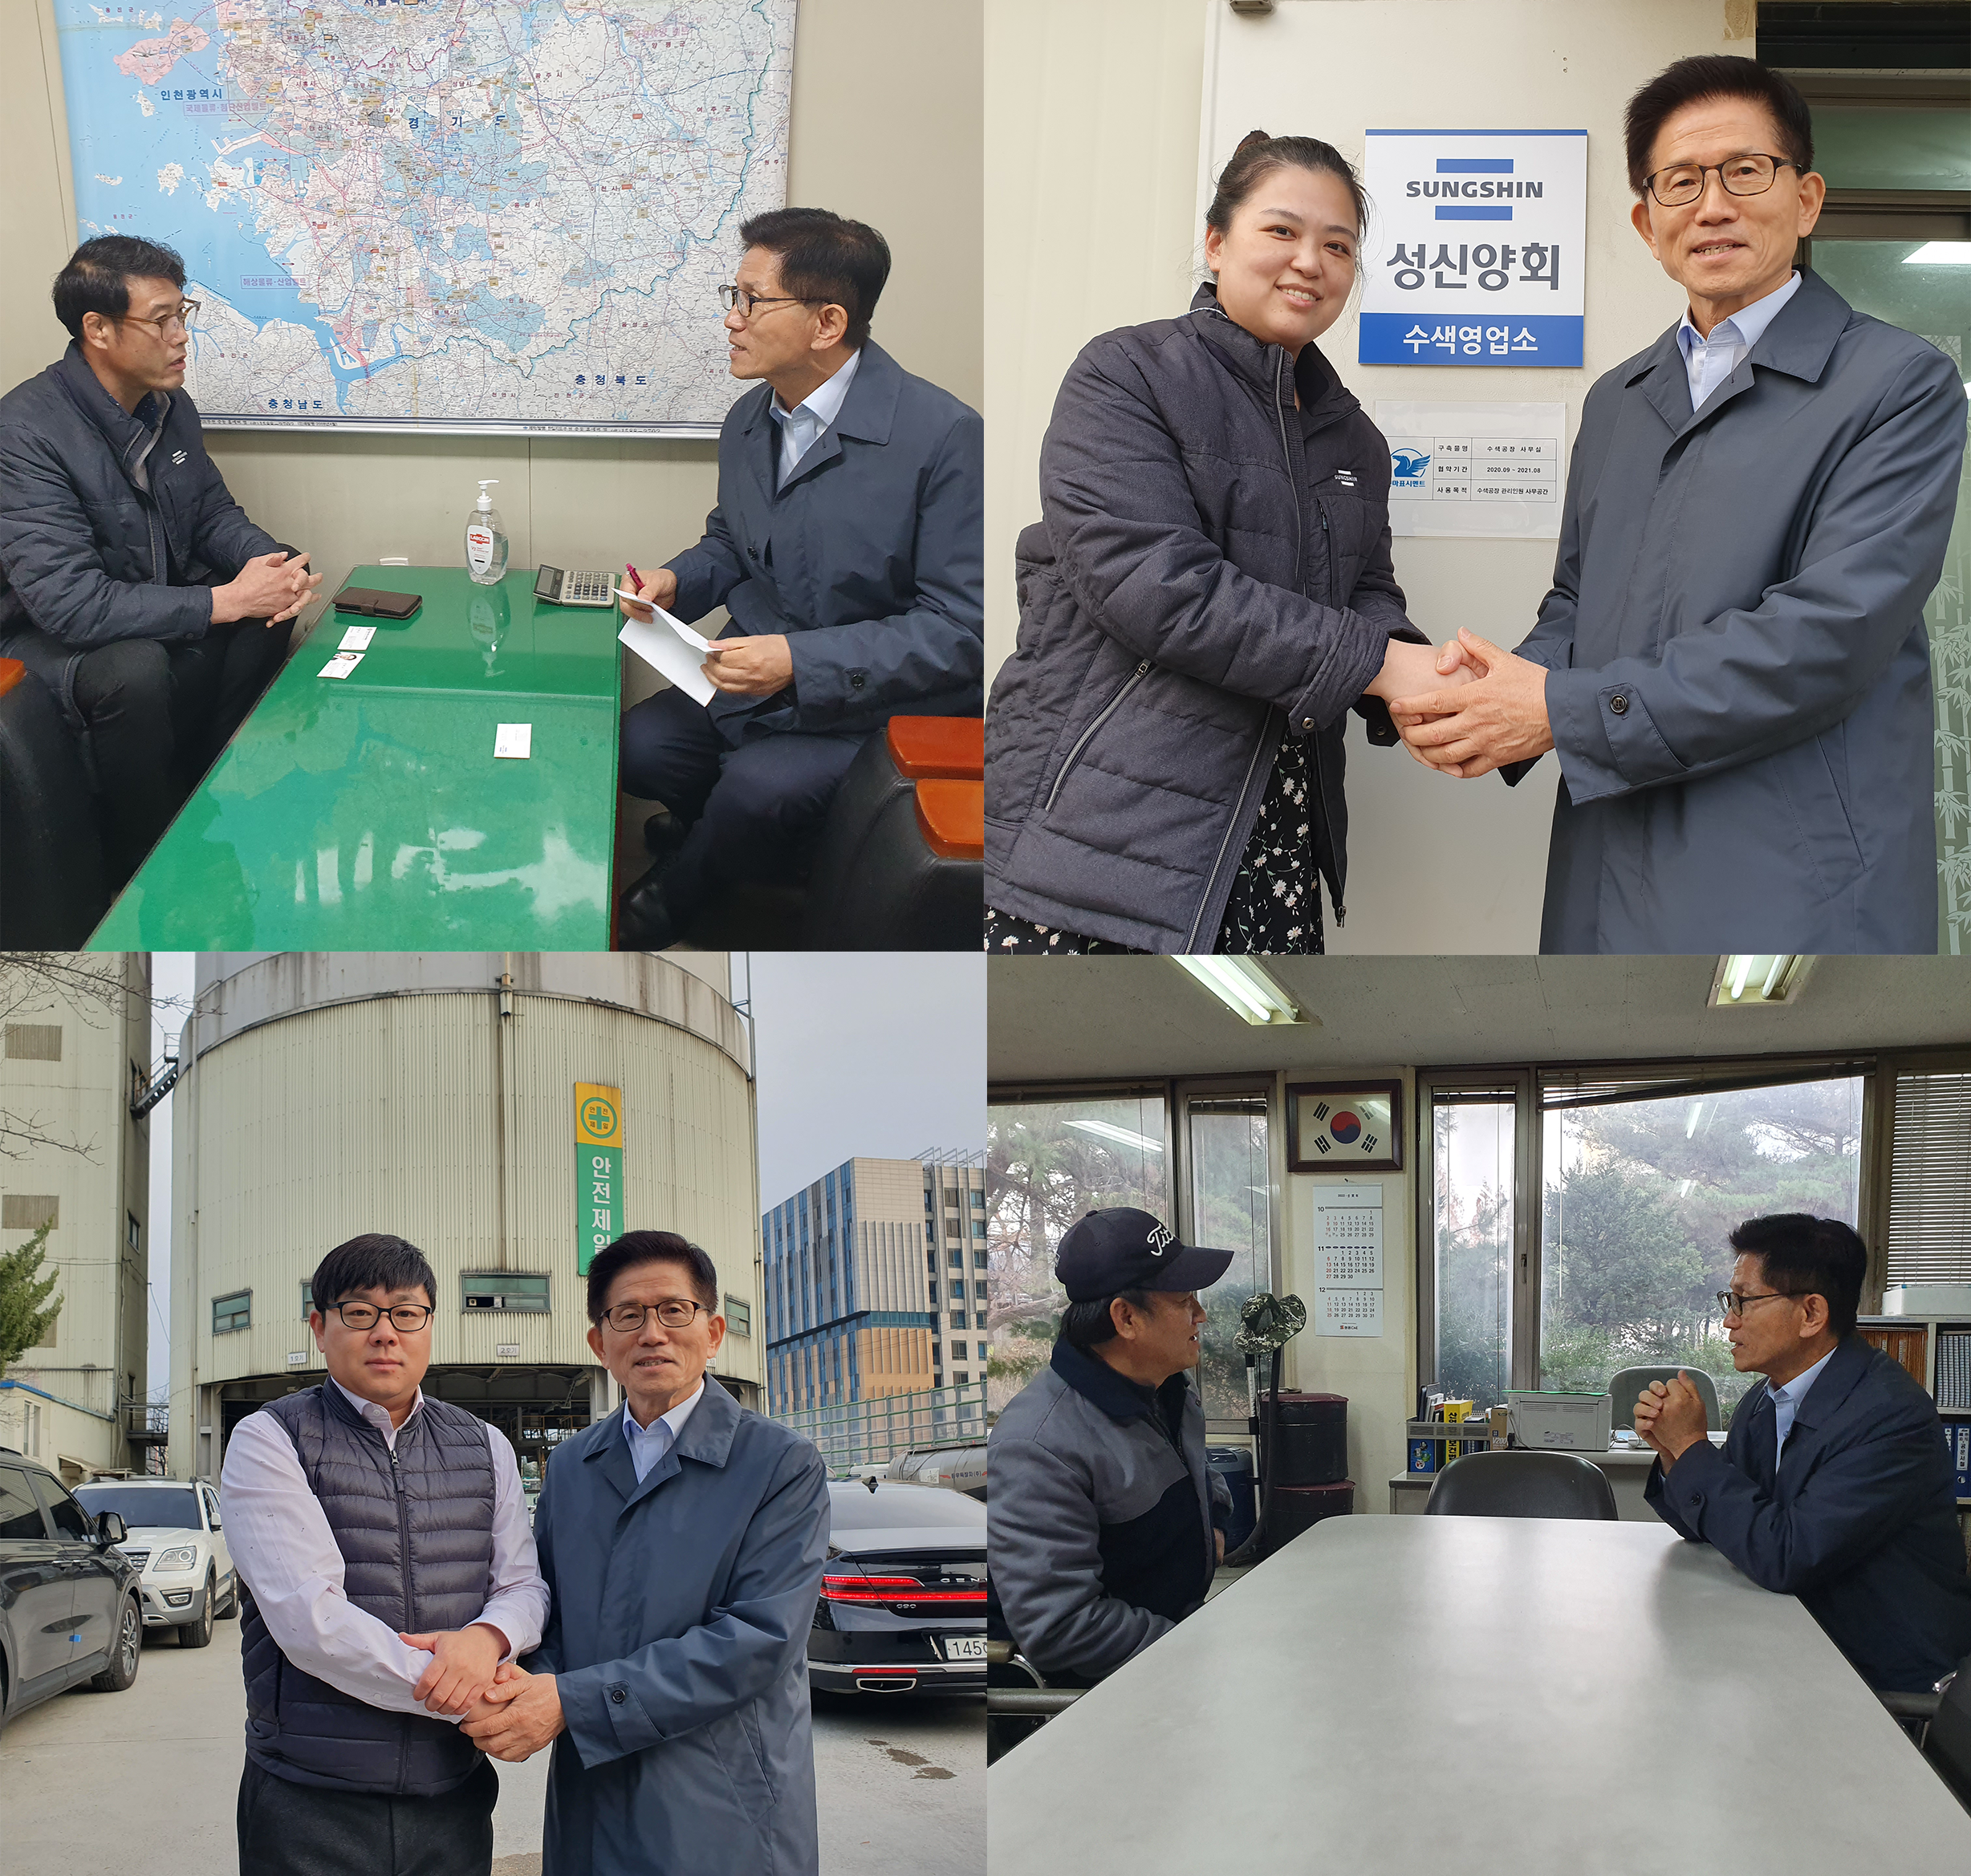 The Chairperson of the ESLC Kim Moon Soo, Visit of SungShin Cement Corporation, Hanil Cement Corporation